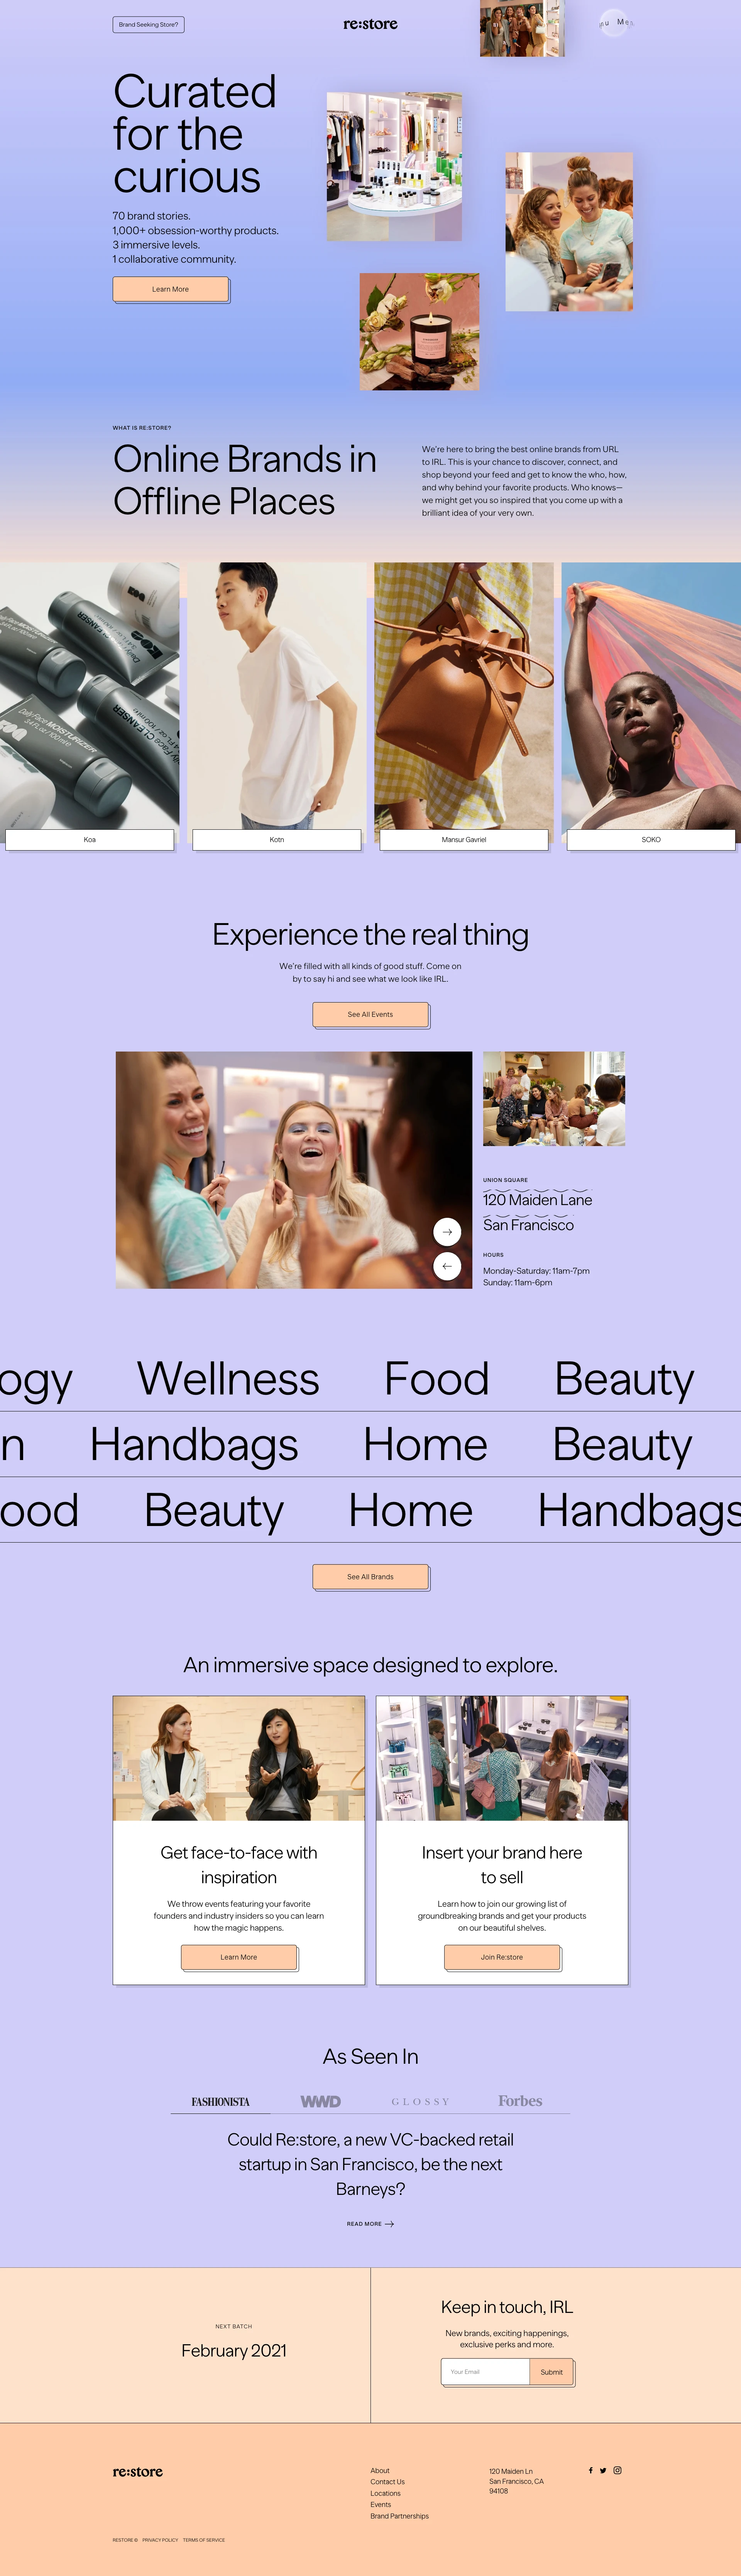 Re:store Landing Page Example: Bringing the best online brands to offline places - offering a community for creators, fans & friends to join forces.